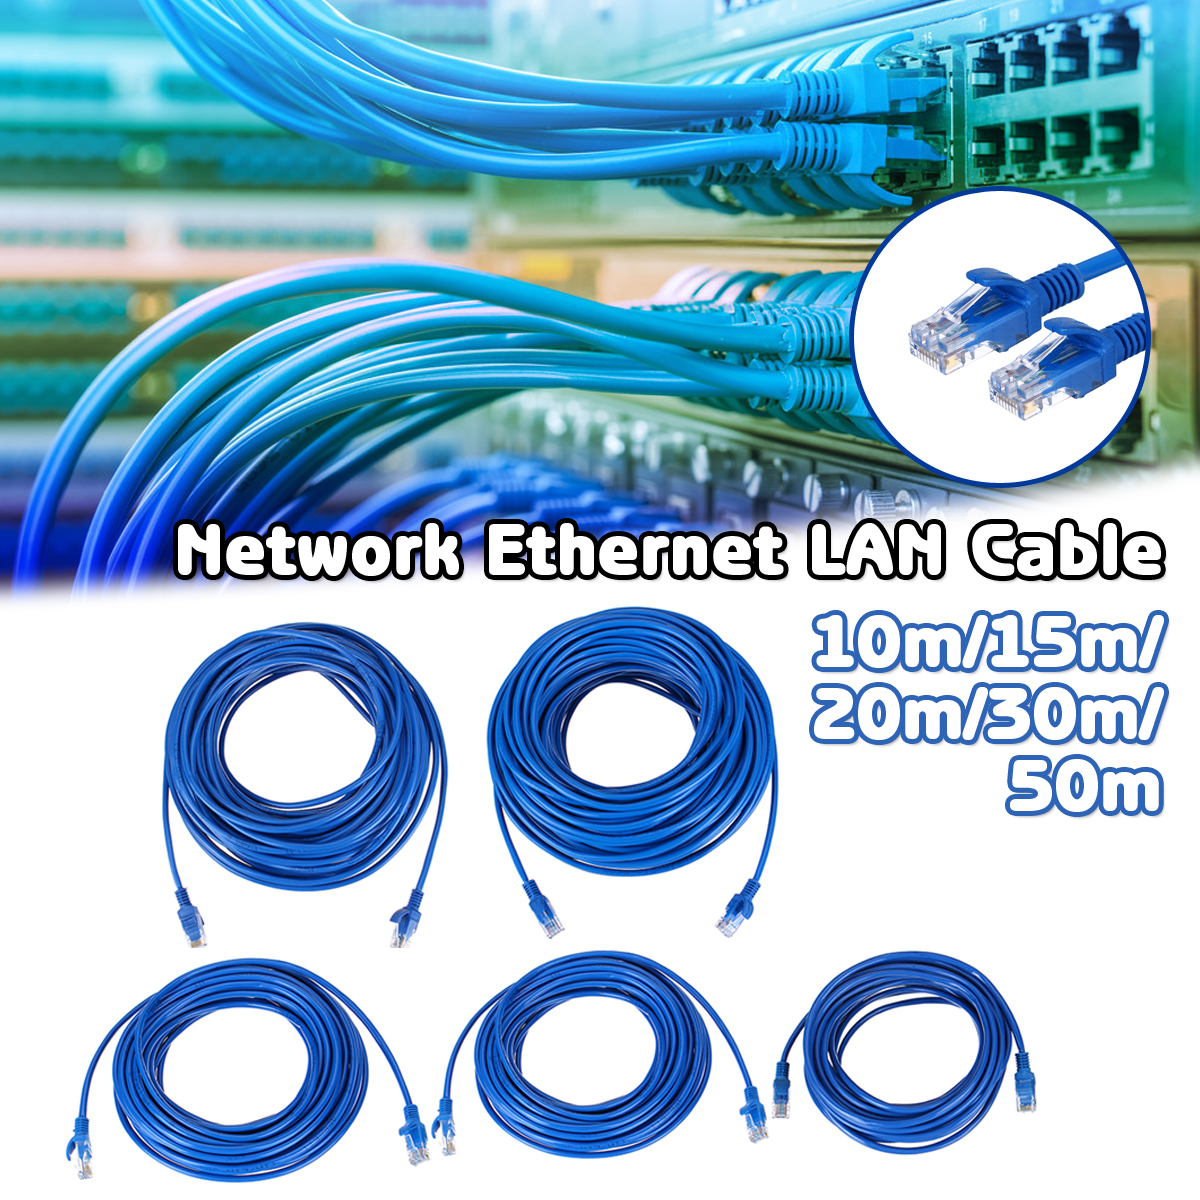 Fast-RJ-45---Male-To-Male-Network-Ethernet-LAN-Cable-Wire-10m15m20m30m50m-1567247-1